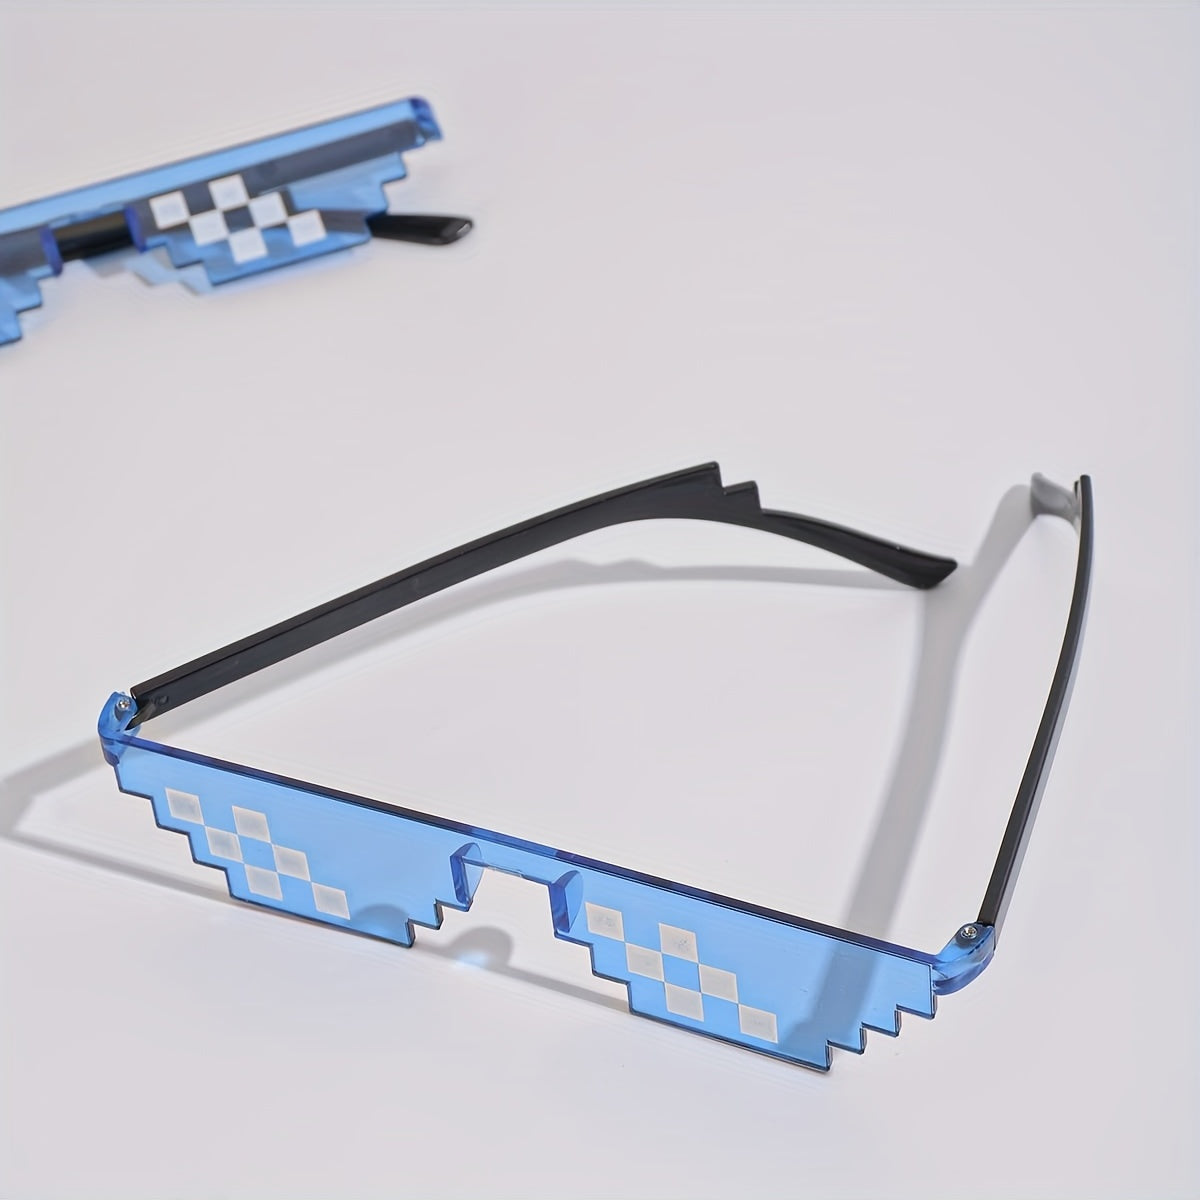 1pc, Festival Party Props Party Photo Props Mosaic Funny Party Glasses Anime Pixel Glasses, Cheap Stuff, Weird Stuff, Mini Stuff, Cute Aesthetic Stuff, Cool Gadgets, Unusual Items, Party Decor, Party Supplies  Christmas time